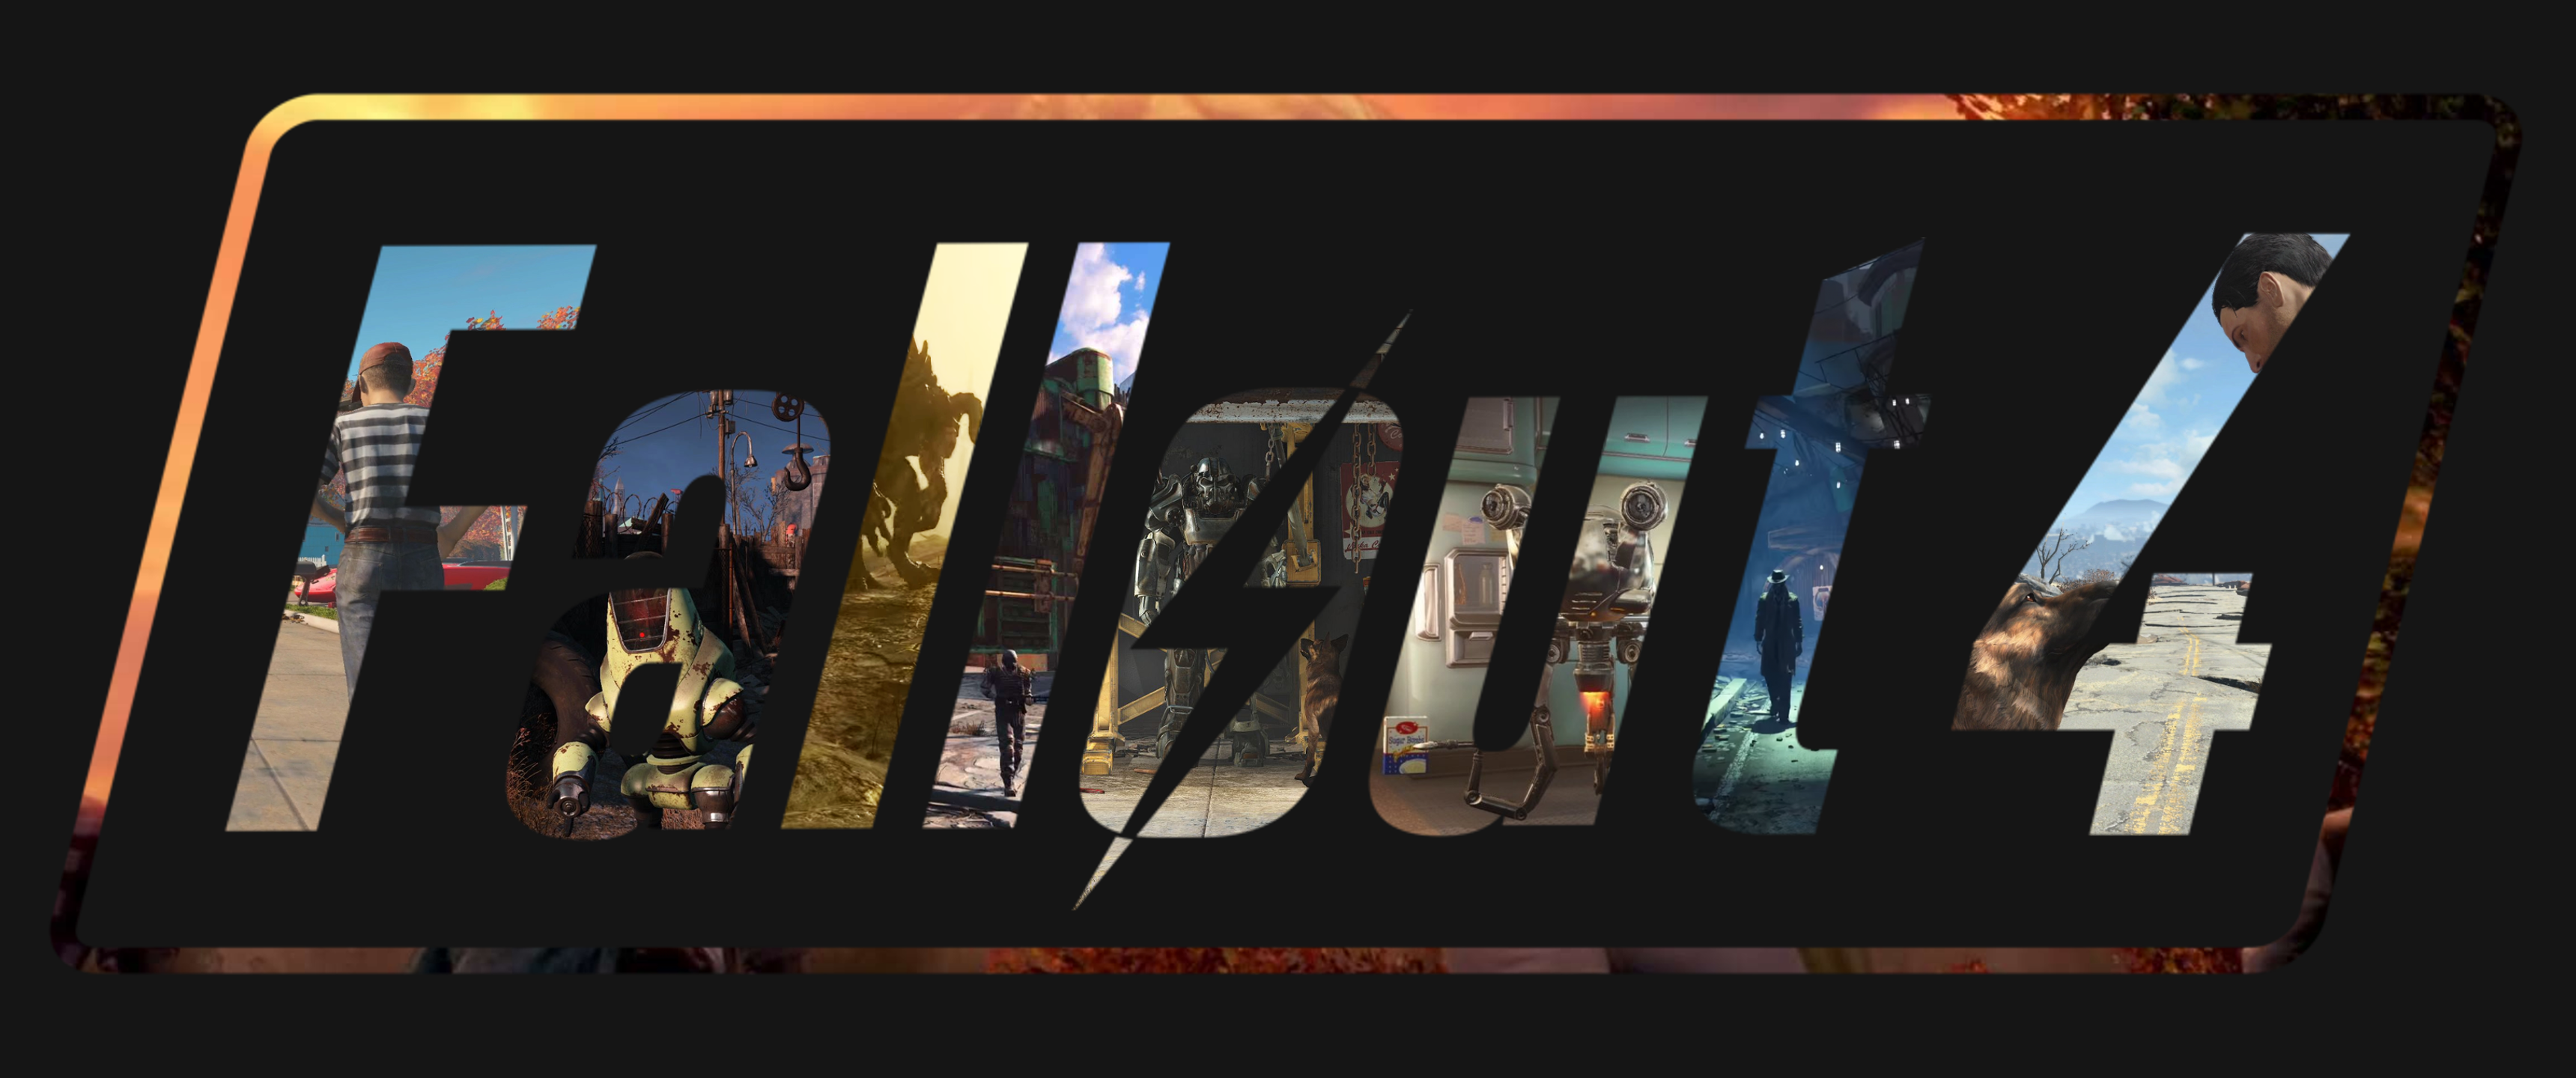 General 3440x1440 Fallout 4 video games Fallout PC gaming black background